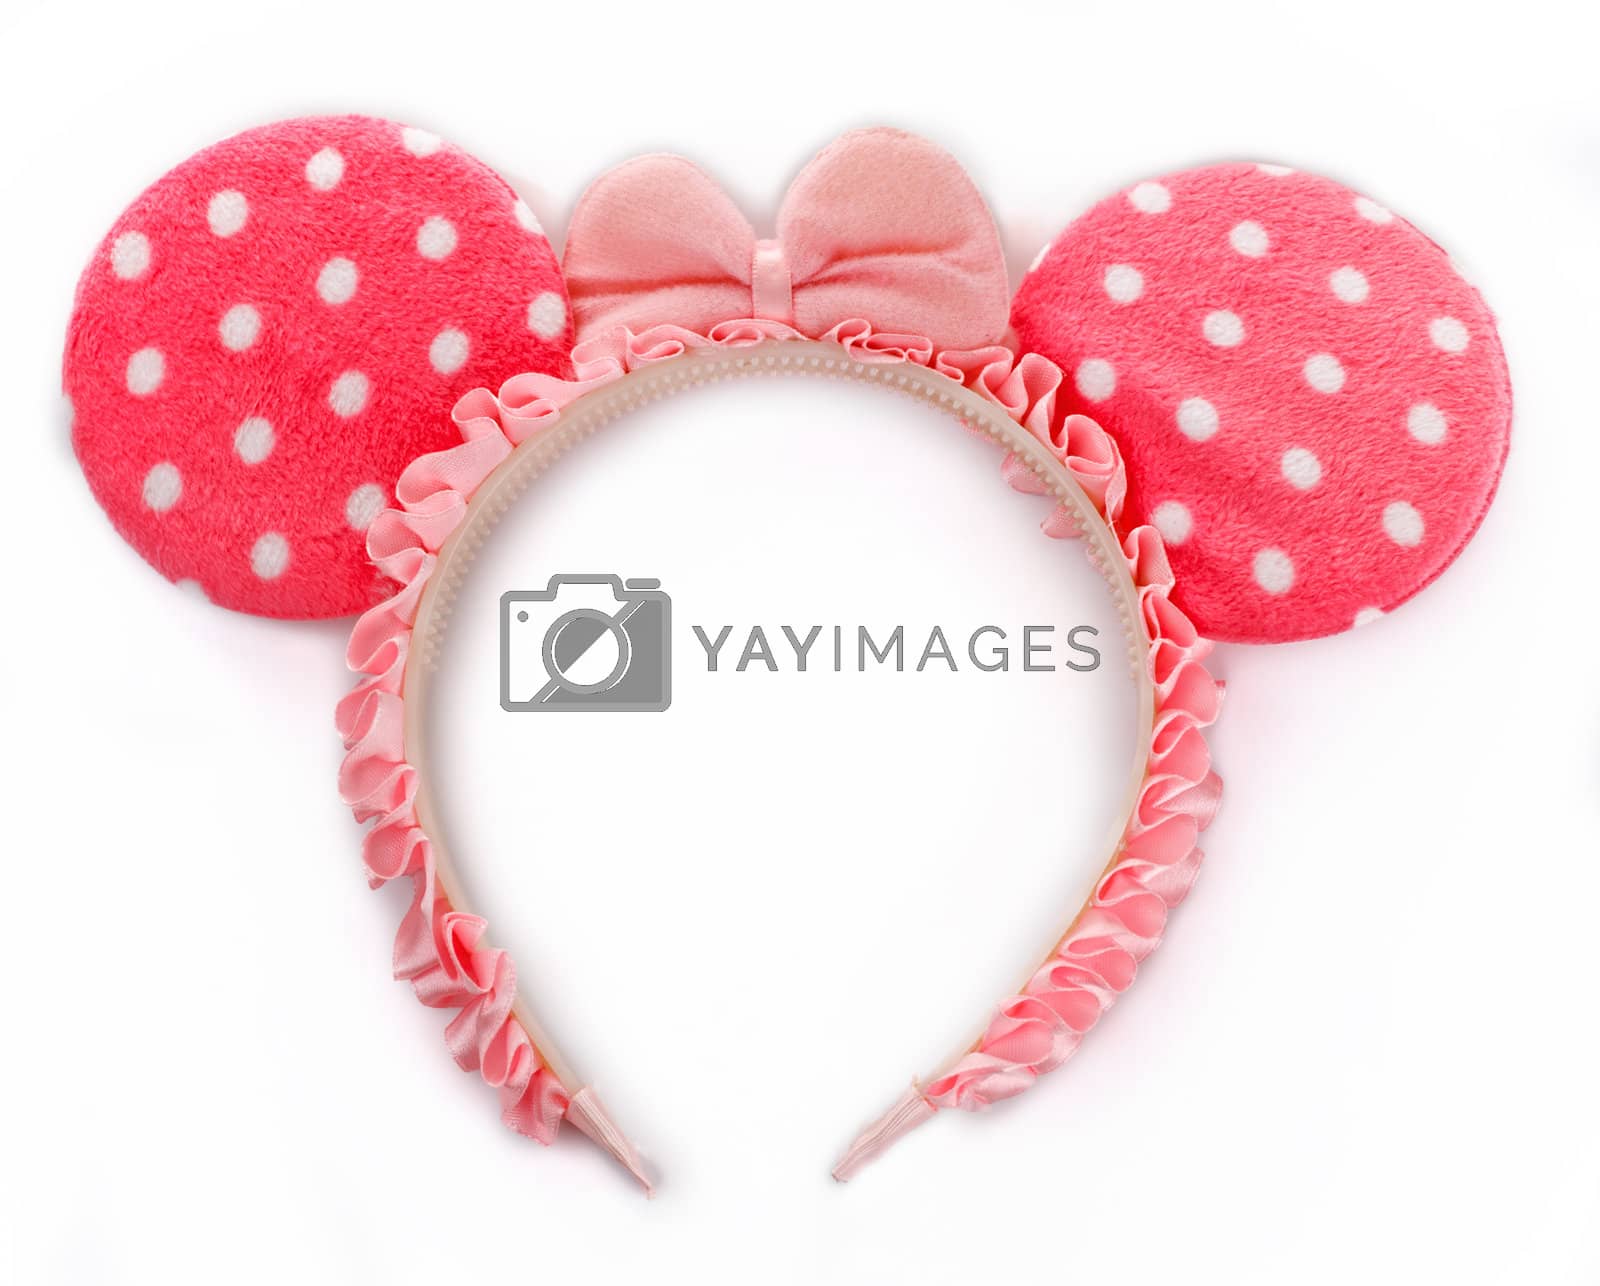 Royalty free image of rim with mouse ears by petr_malyshev